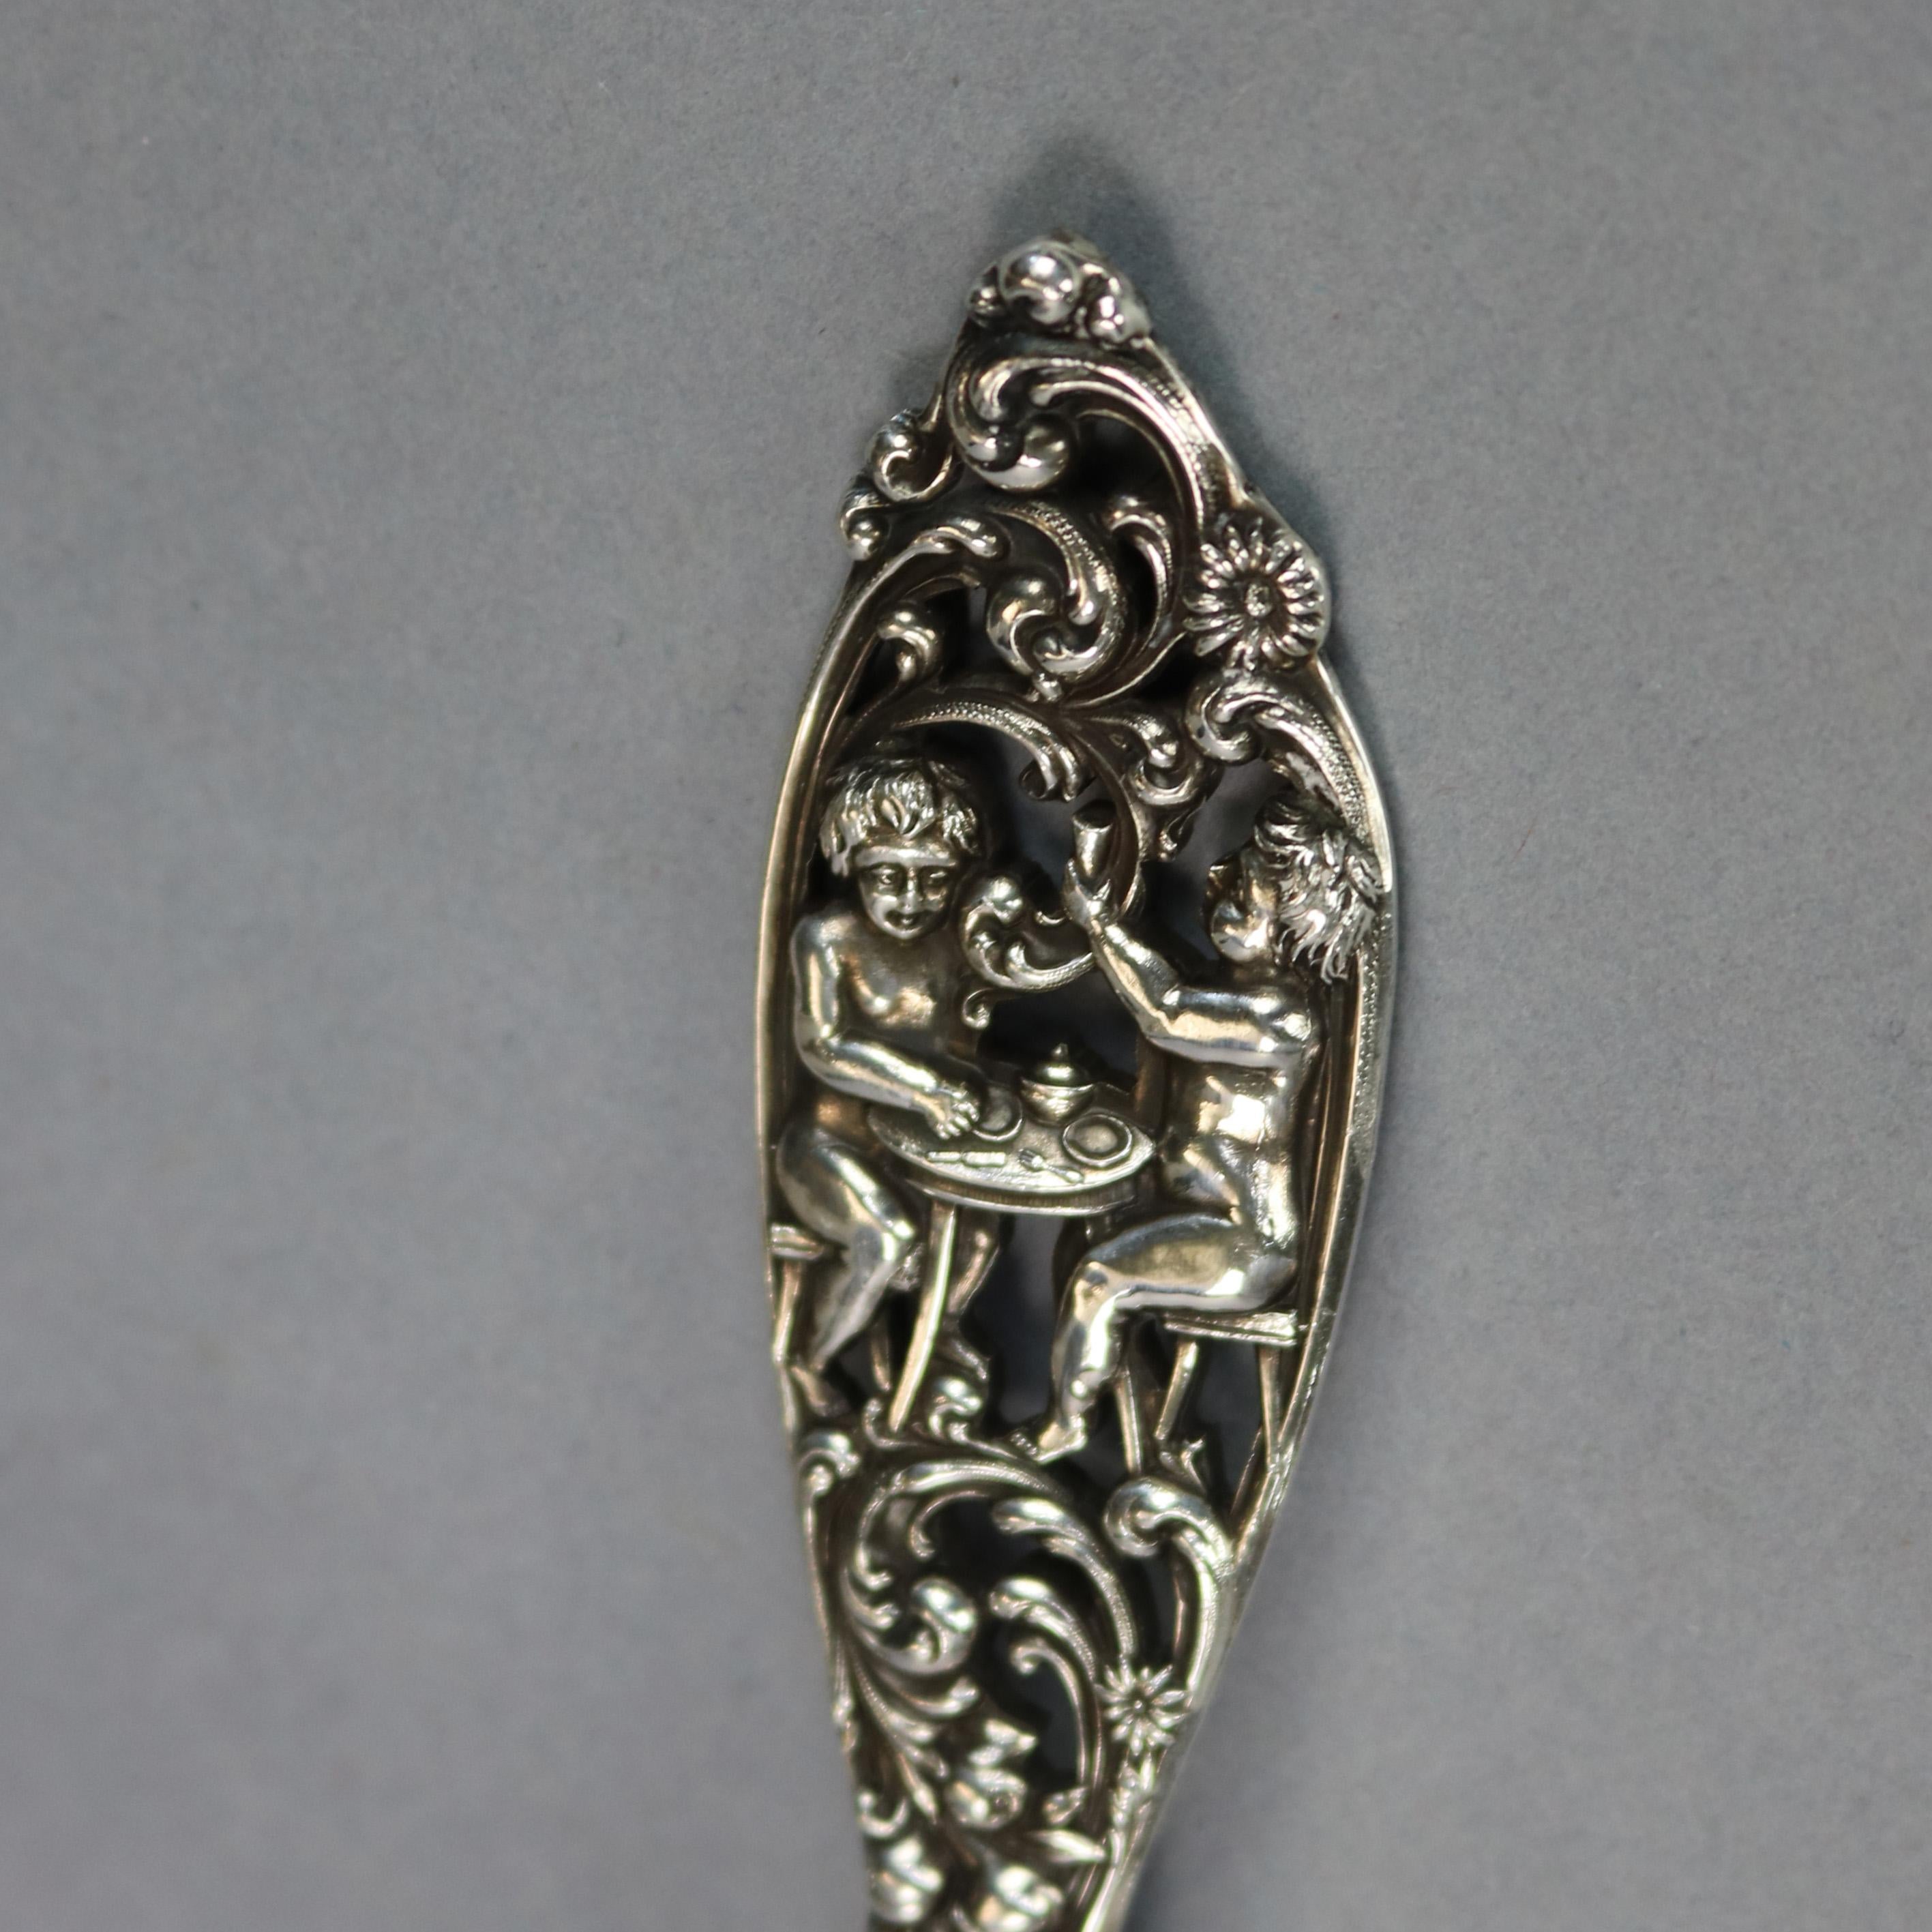 An antique pair of sterling silver figural 